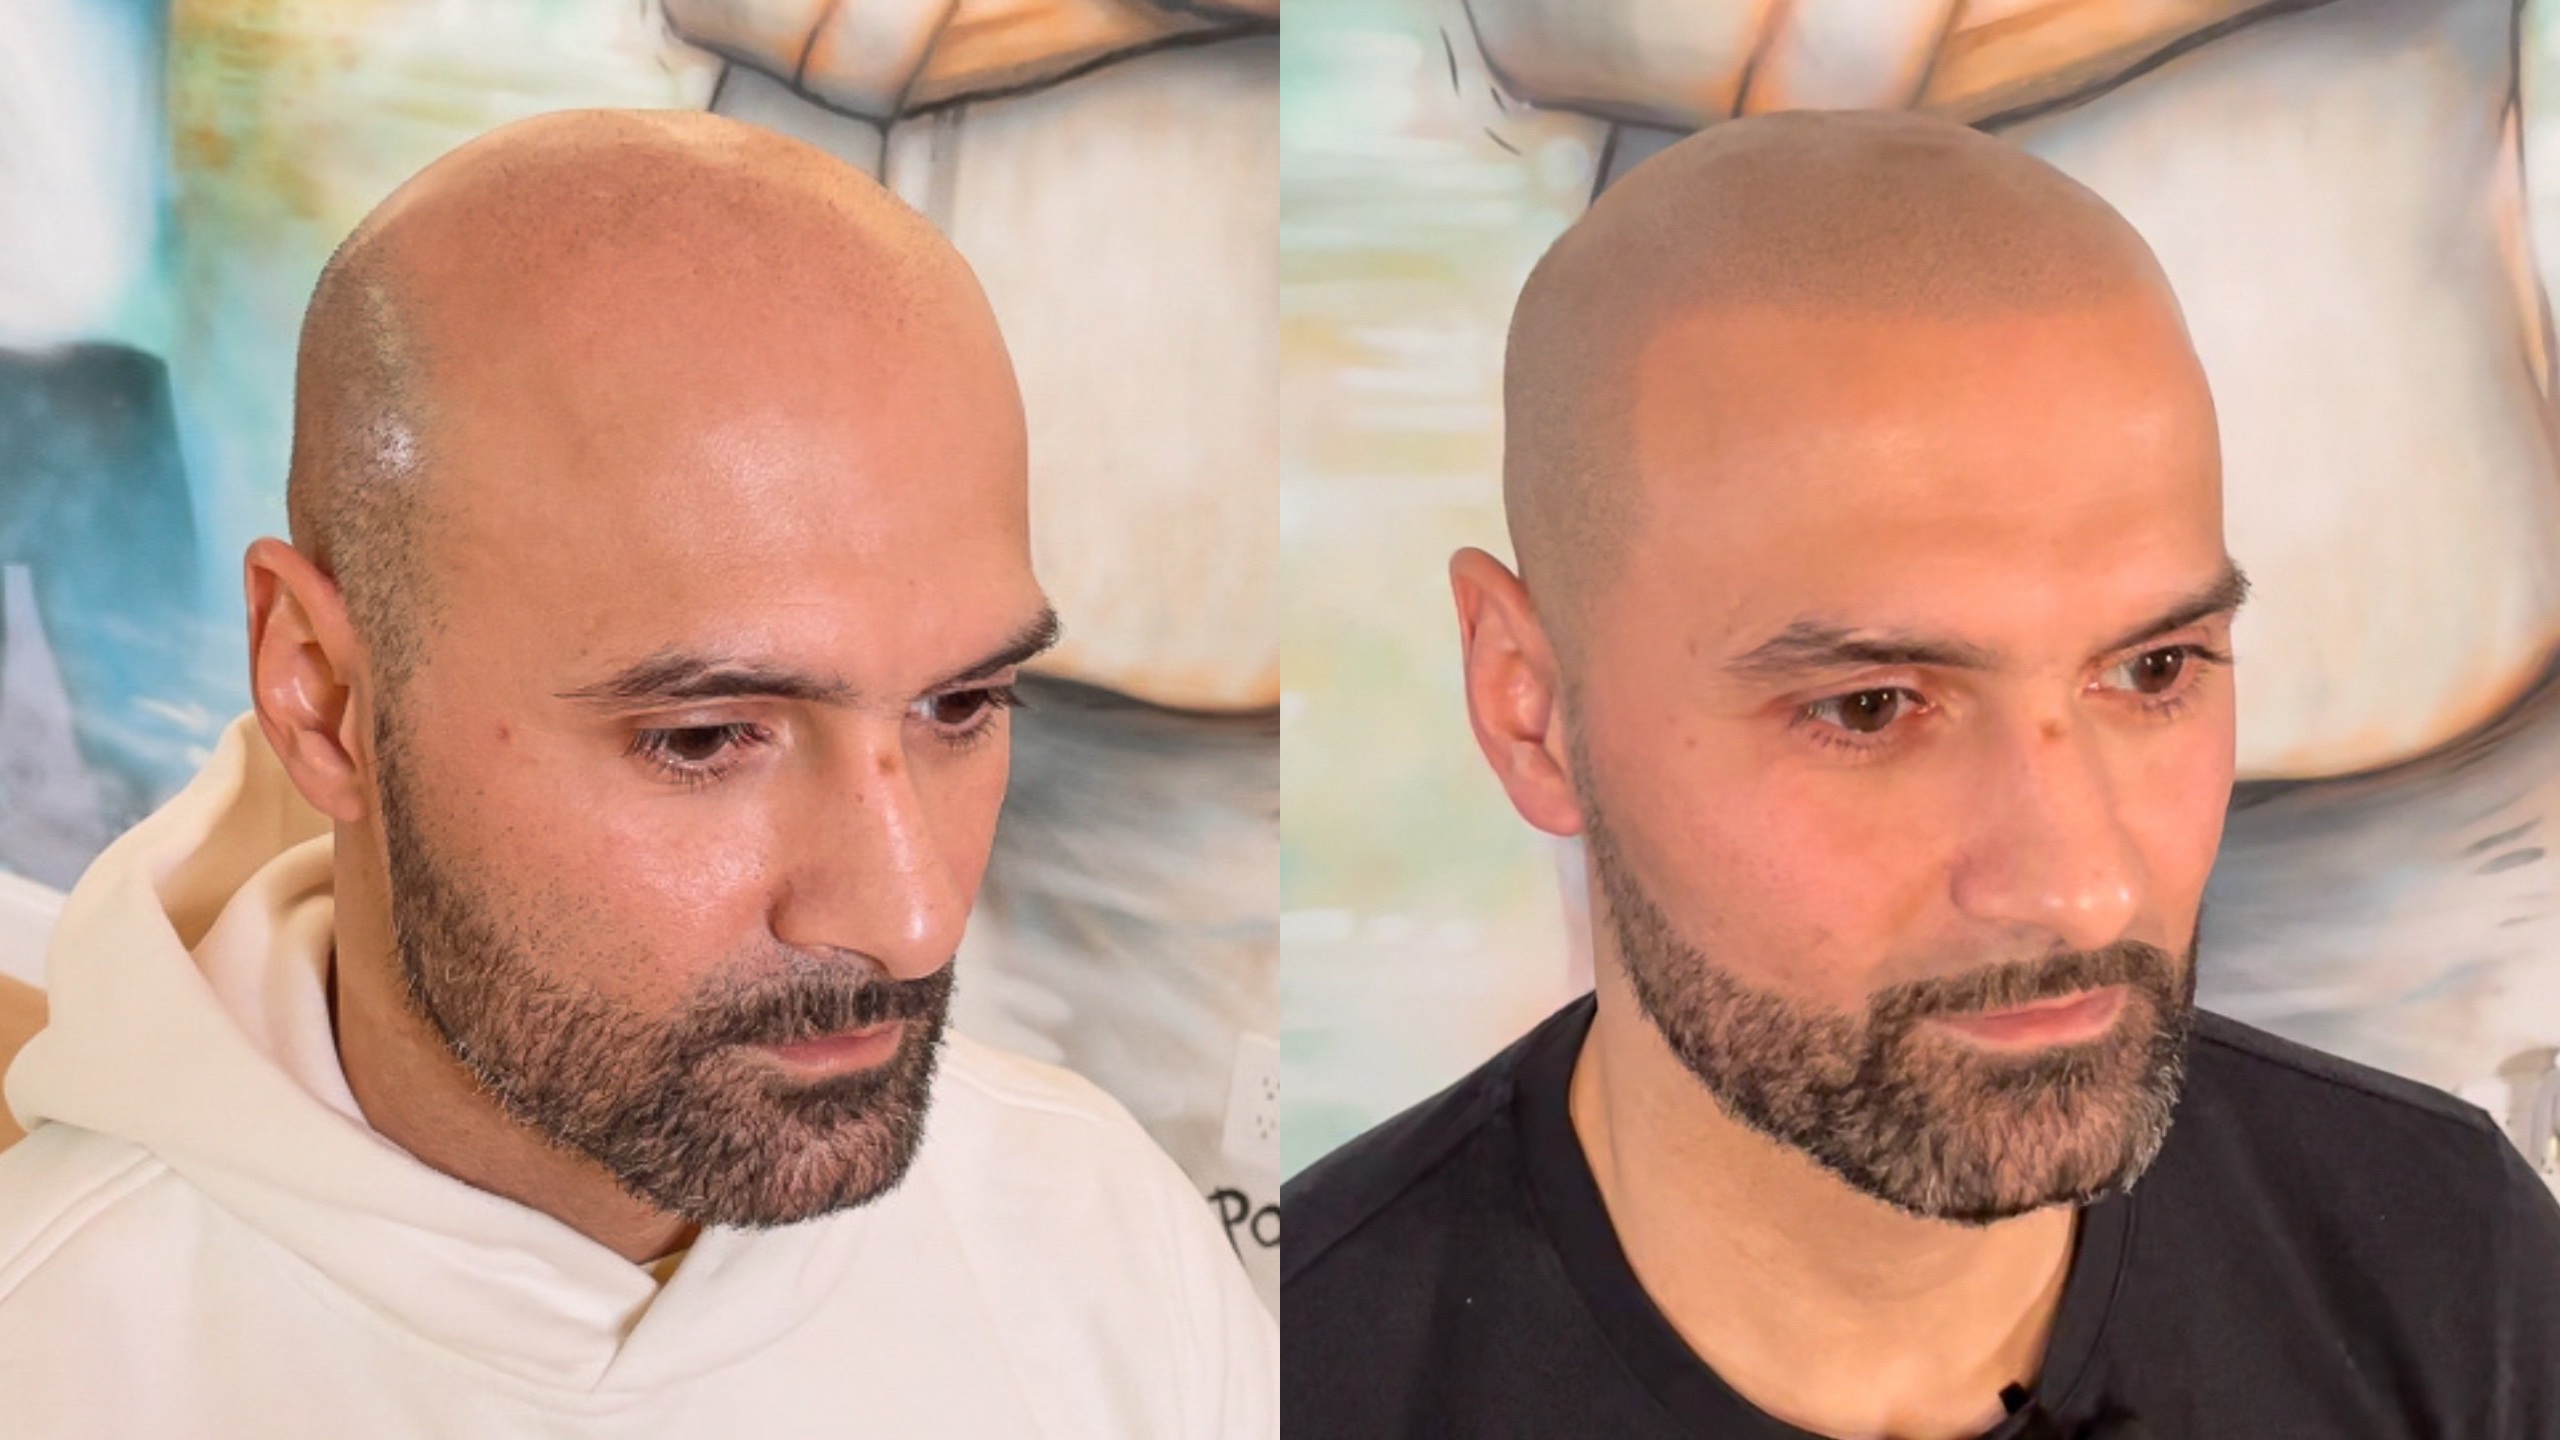 SUPER NATURAL Scalp Micropigmentation Before and After w/ Matt Iulo -  YouTube